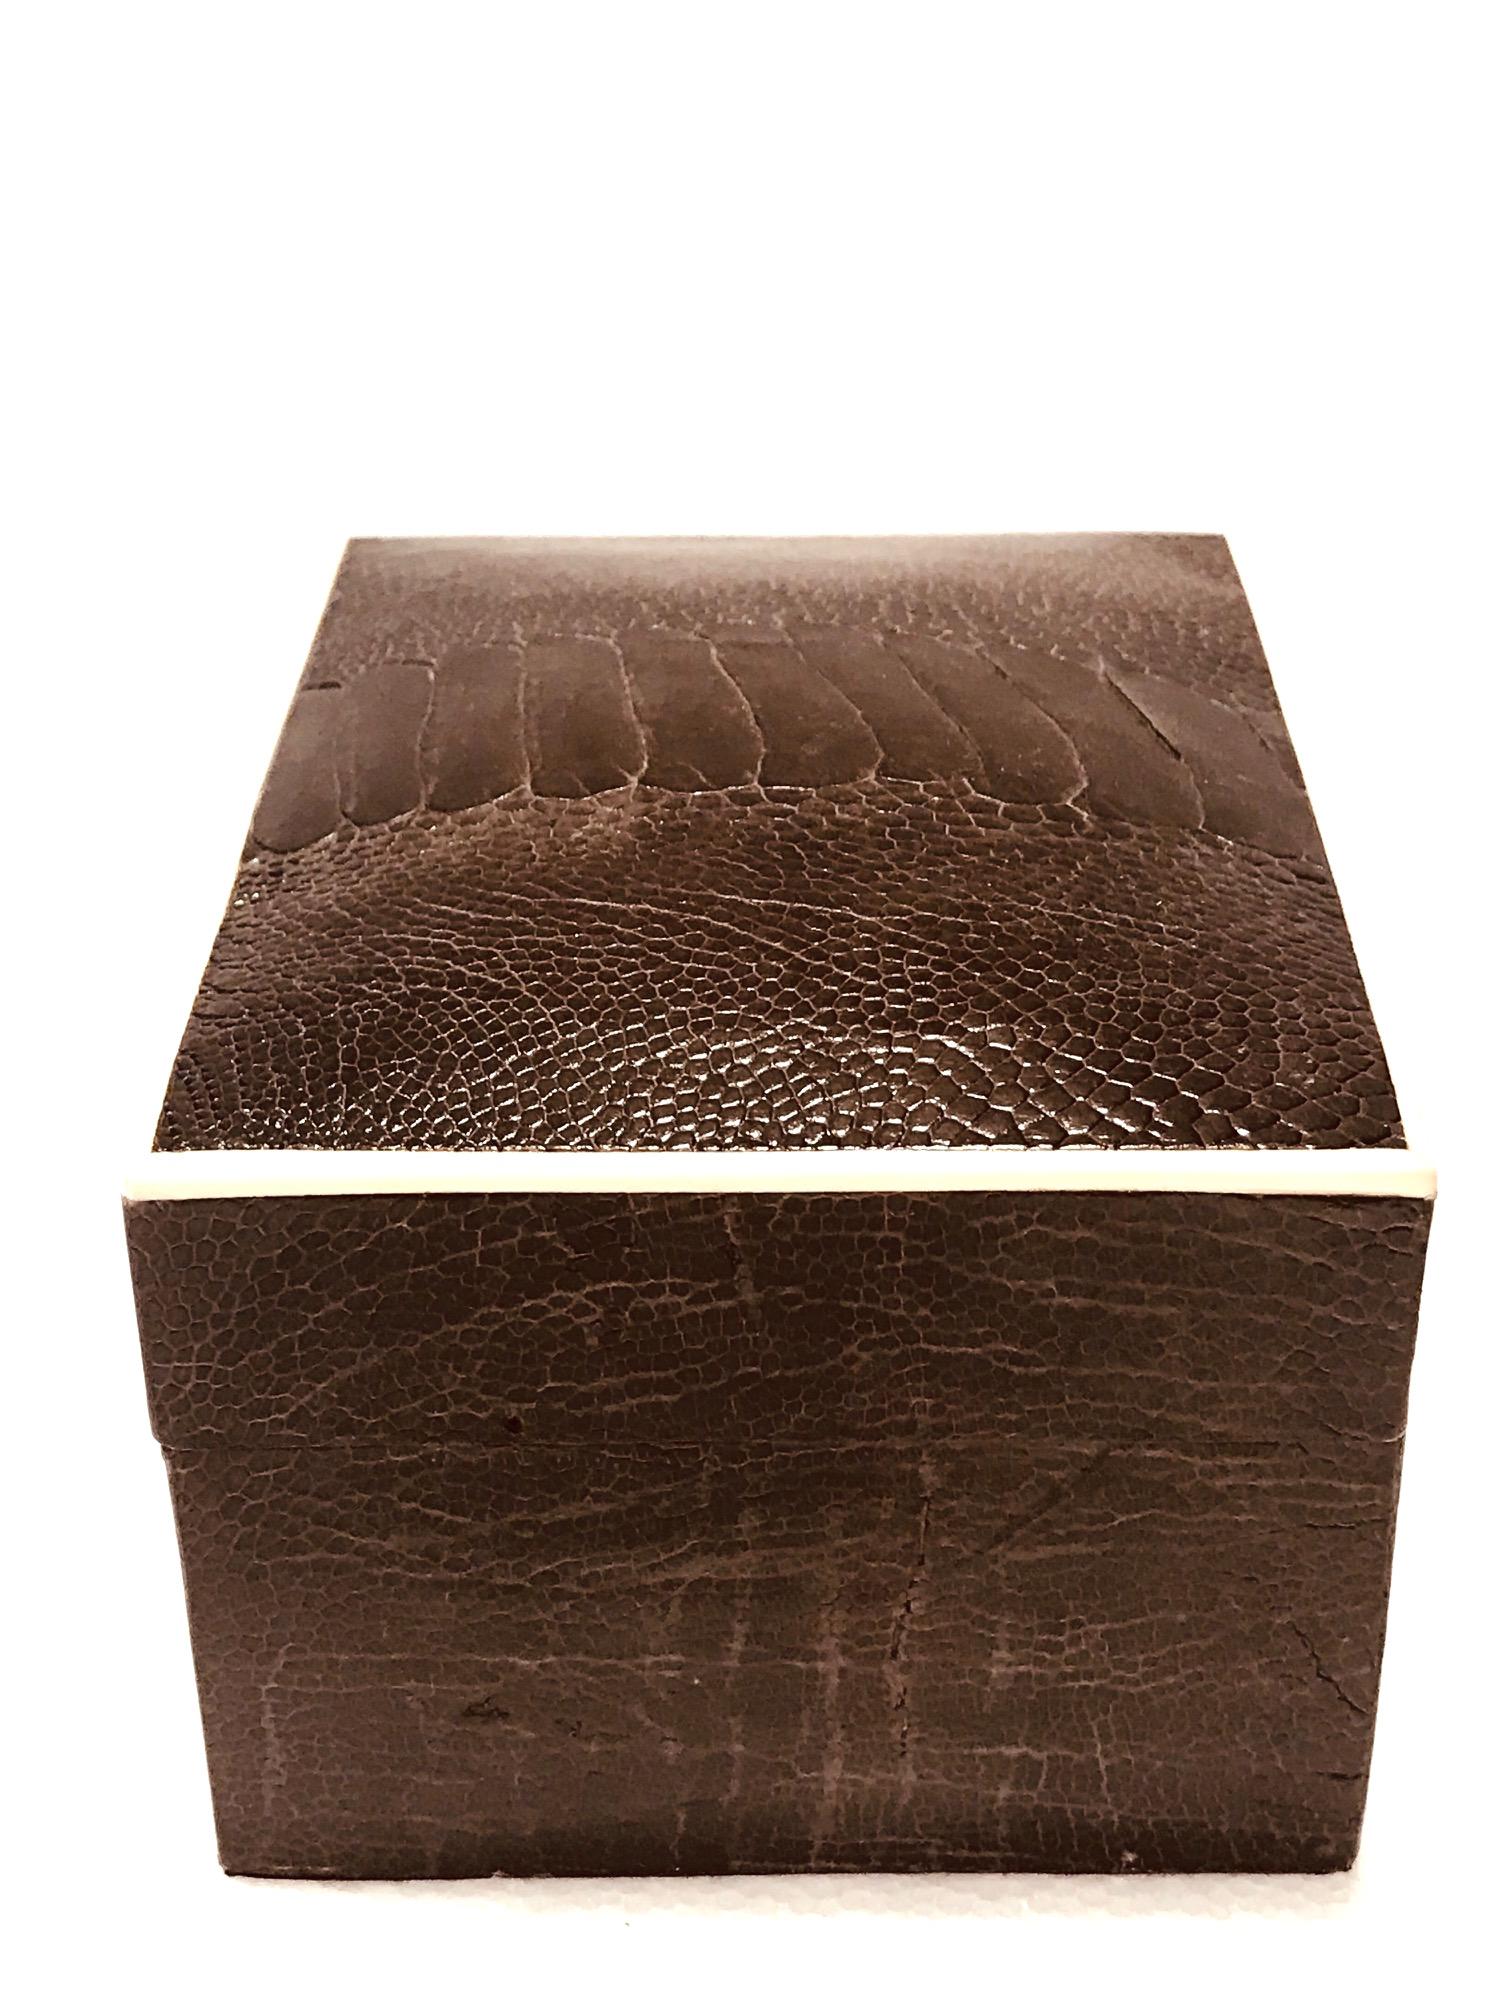 Hand-Crafted Vintage R & Y Augousti Decorative Box in Brown Ostrich Leather and Bone